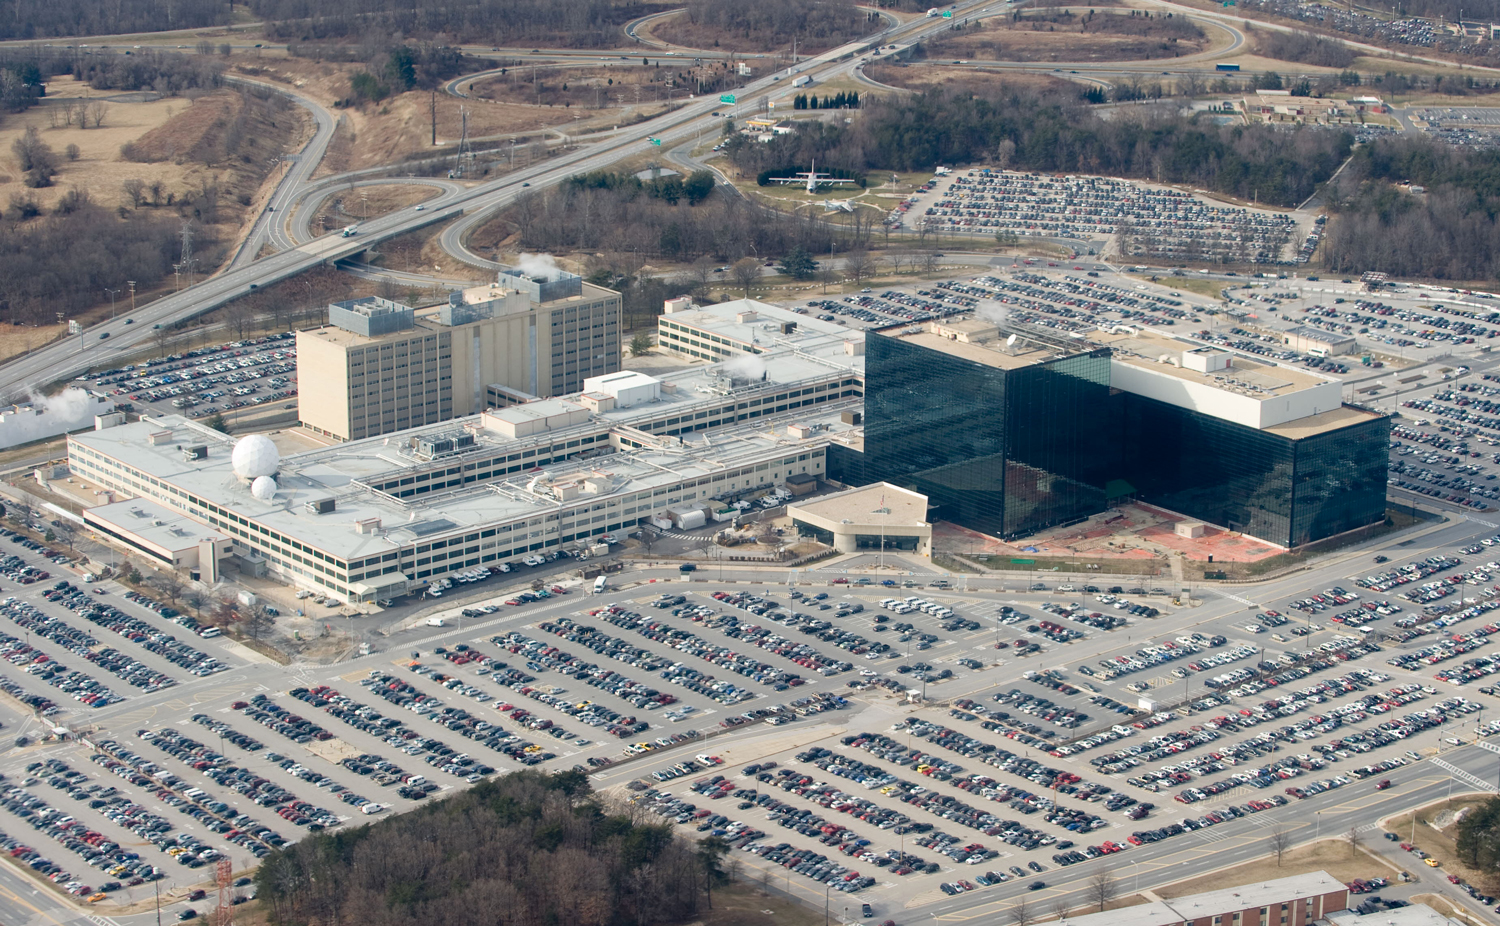 NSA headquarters, where software vulnerabilities go to be hoarded in secret ... and then stolen, leaked, and unleashed on an unsuspecting public.